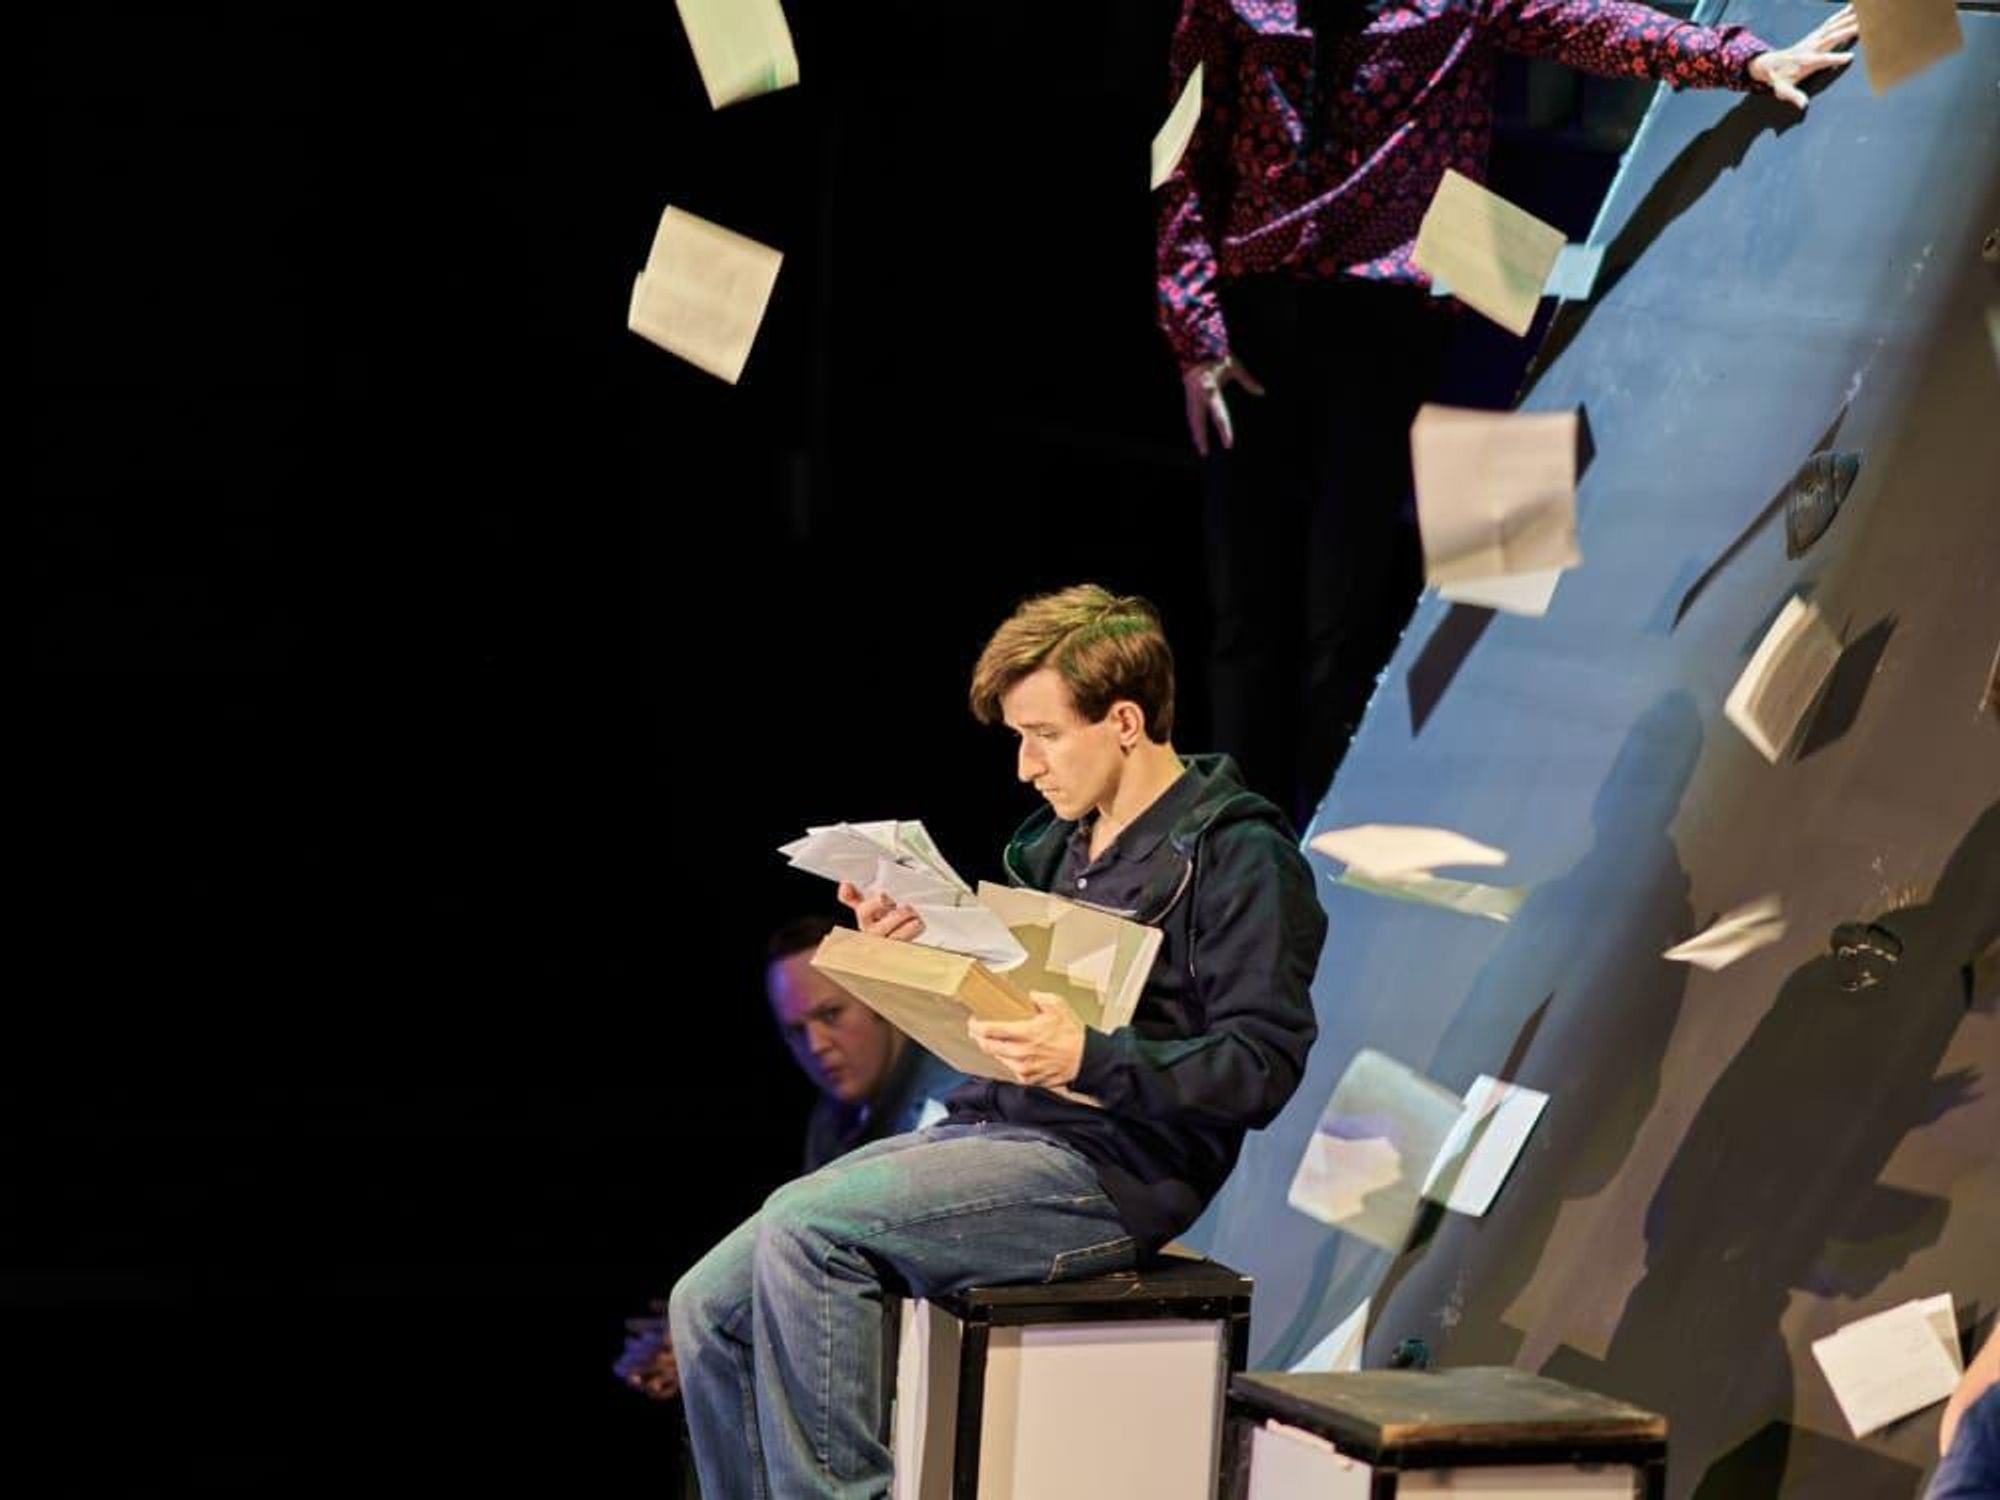 WaterTower Theatre presents The Curious Incident of the Dog in the Night-time